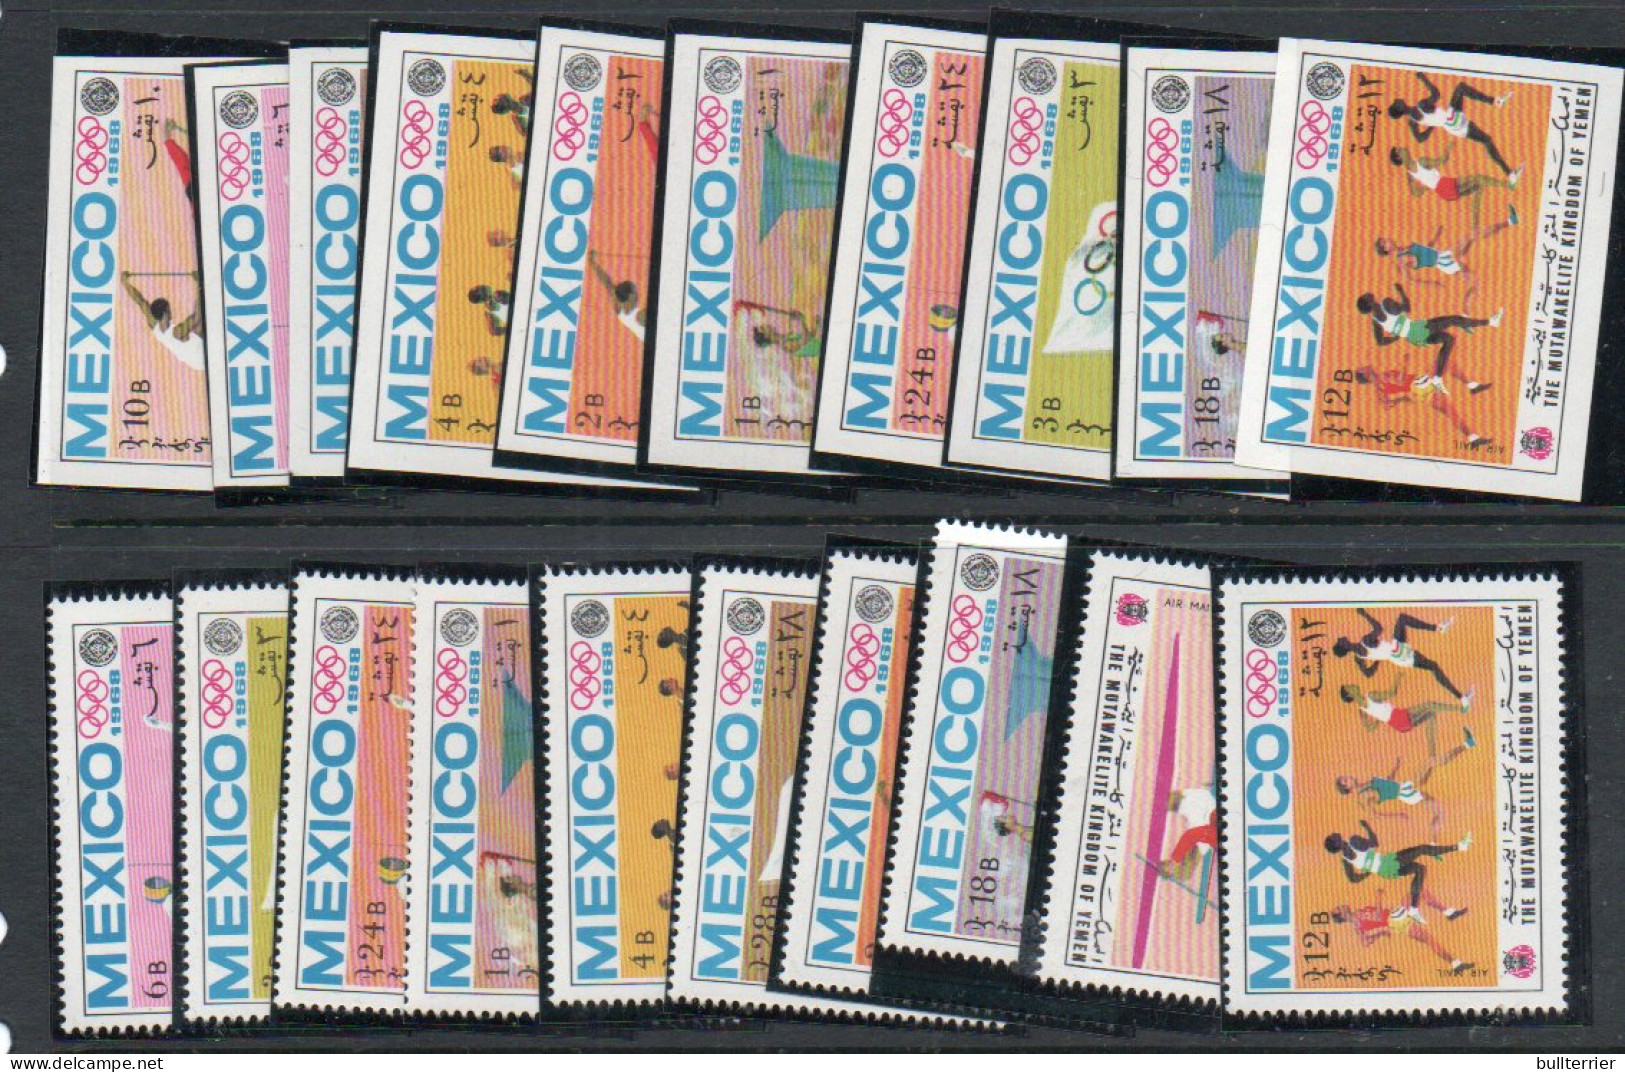 OLYMPICS - YEMEN KINGDOM -1968-MEXICO OLYMPICS SETS OF 10 PERF & IMPERF  MINT NEVER HINGED,  - Summer 1968: Mexico City